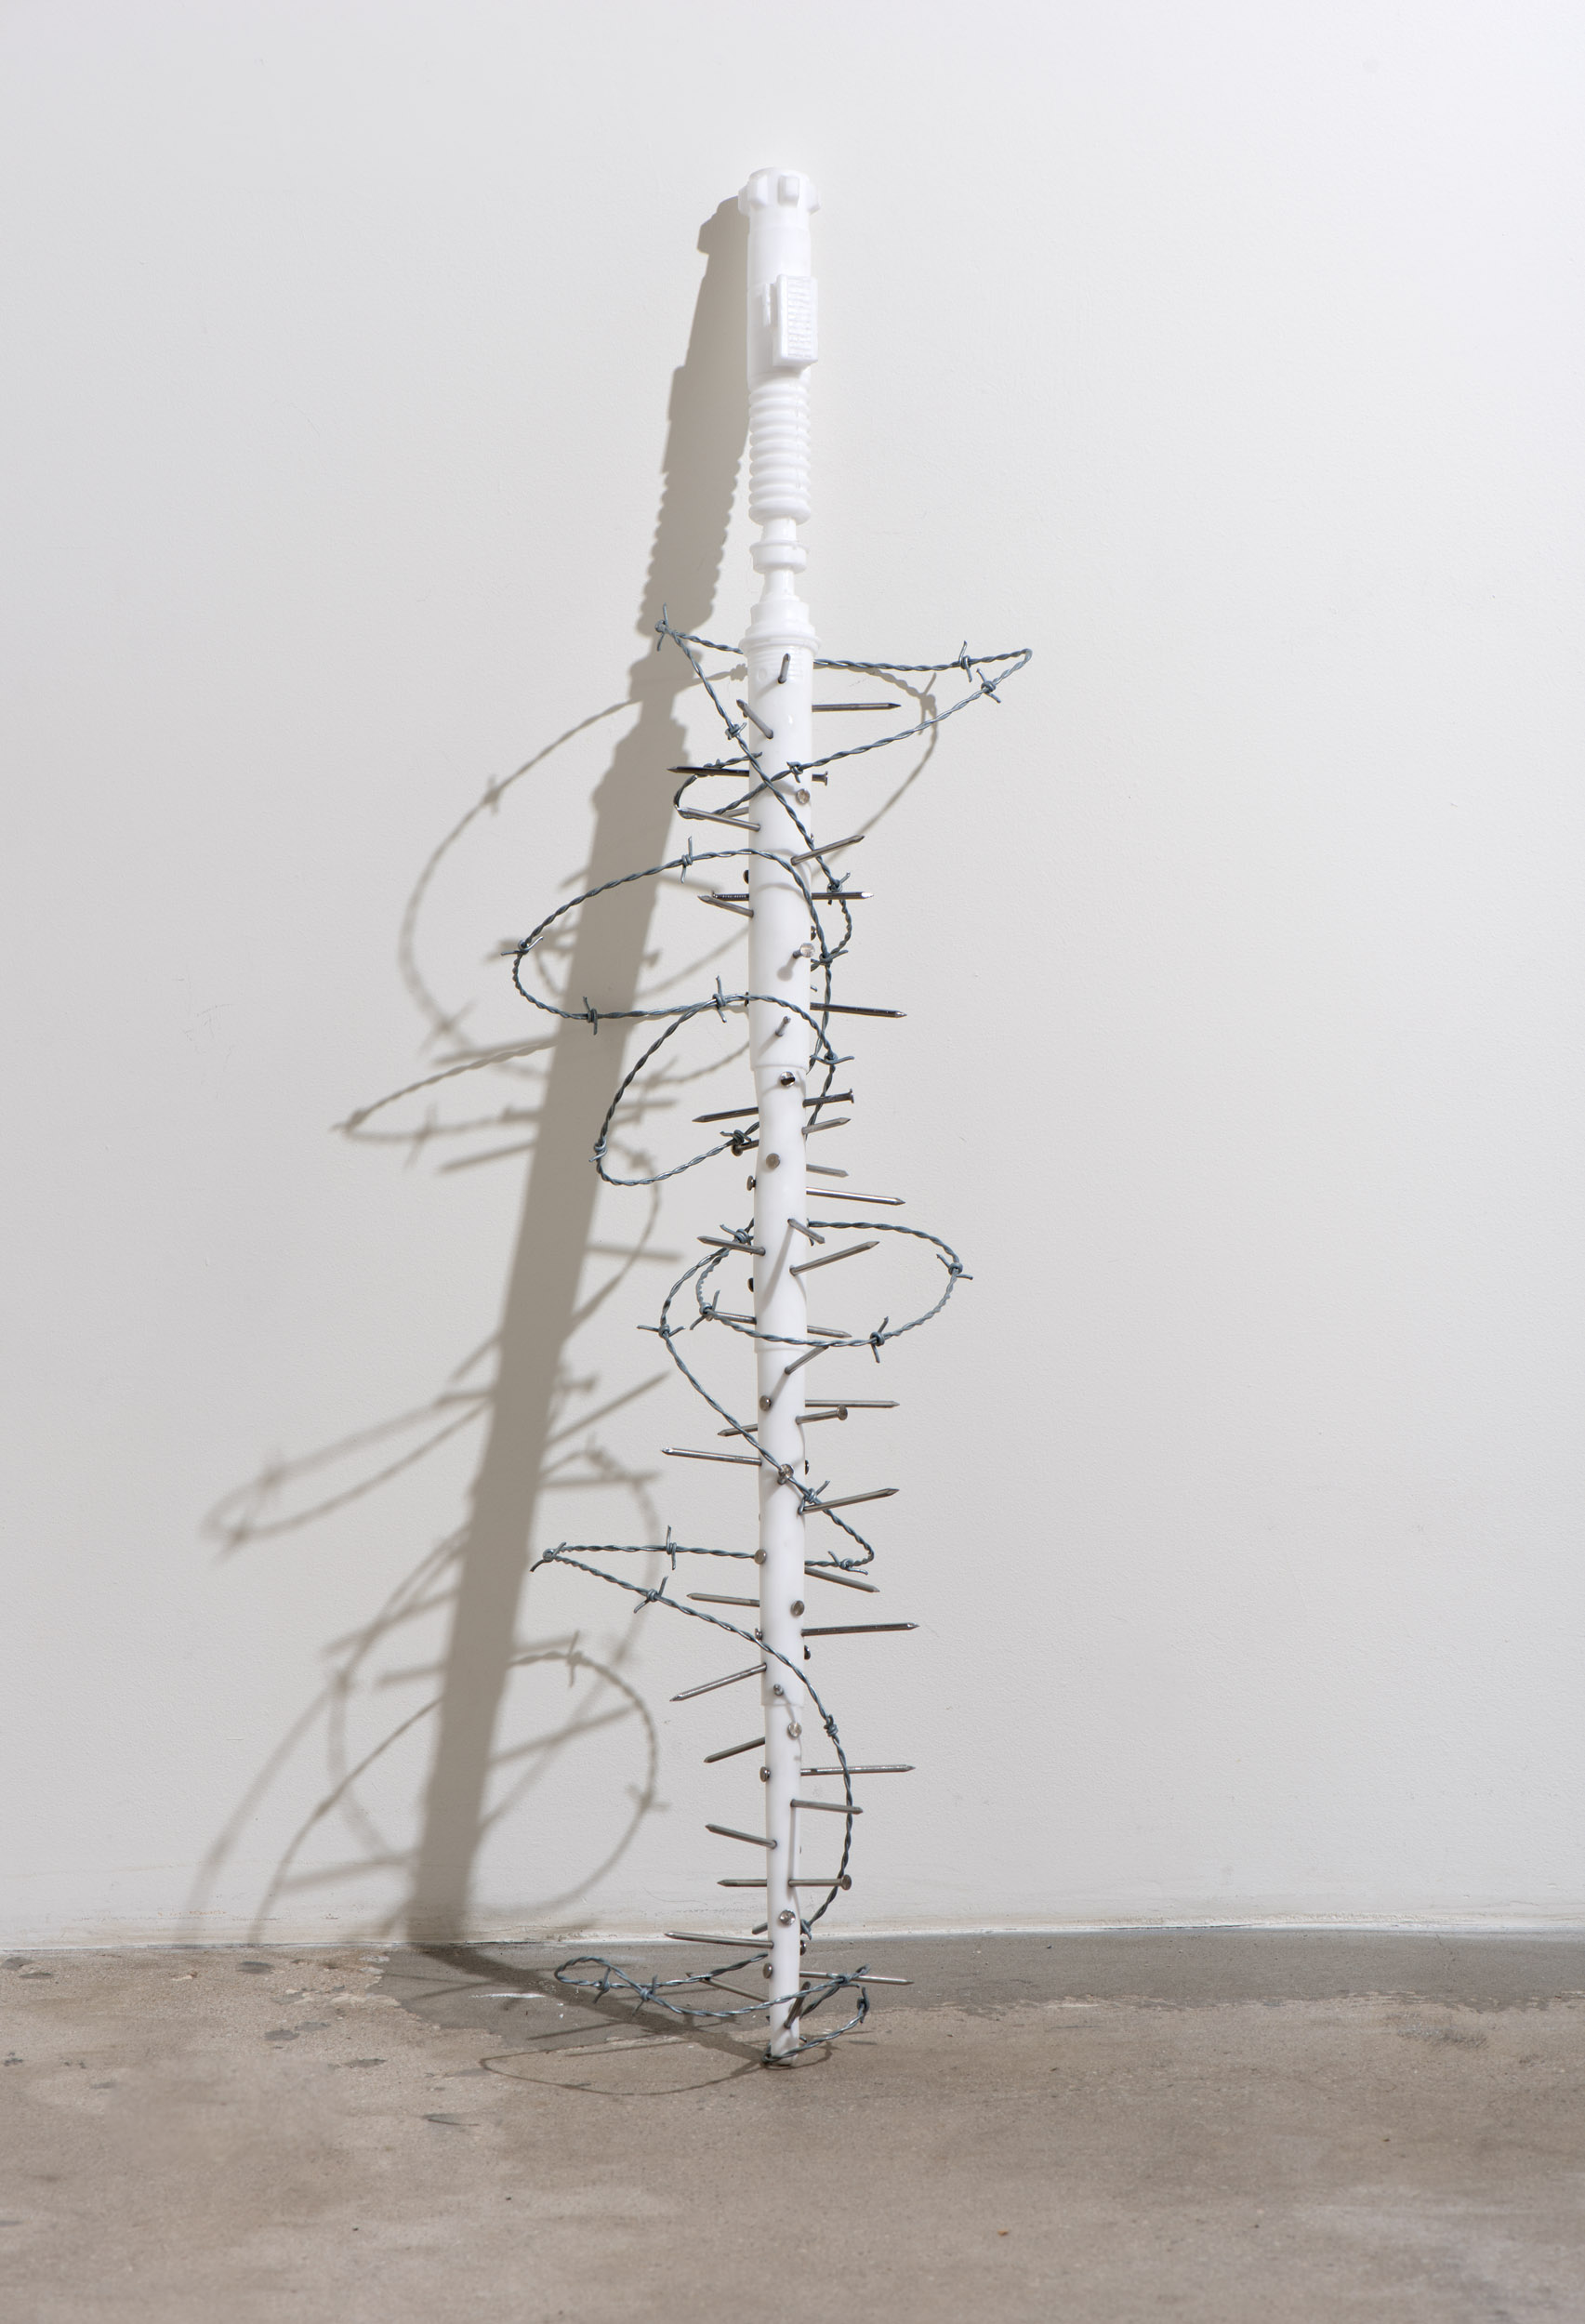   Morning Star , 2018 Urethane, pigment, nails, barbed wire 41 x 8 x 8 inches 